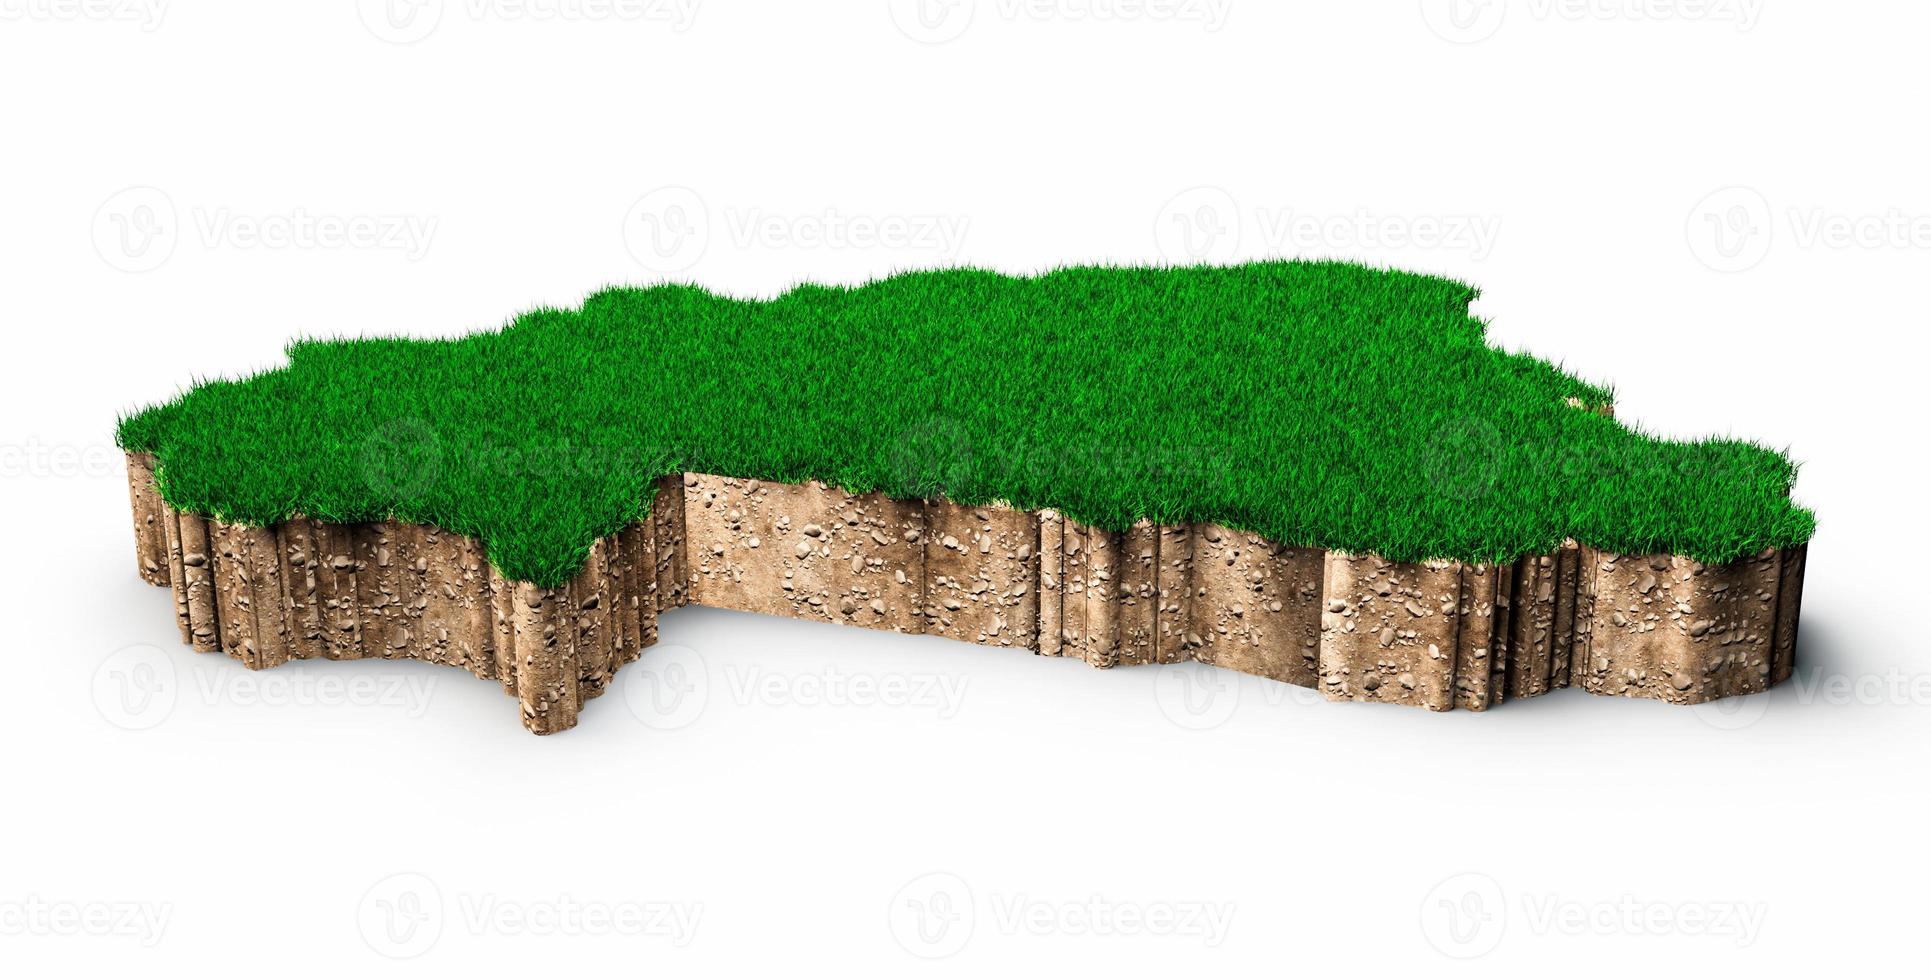 Burkina Faso Map soil land geology cross section with green grass and Rock ground texture 3d illustration photo